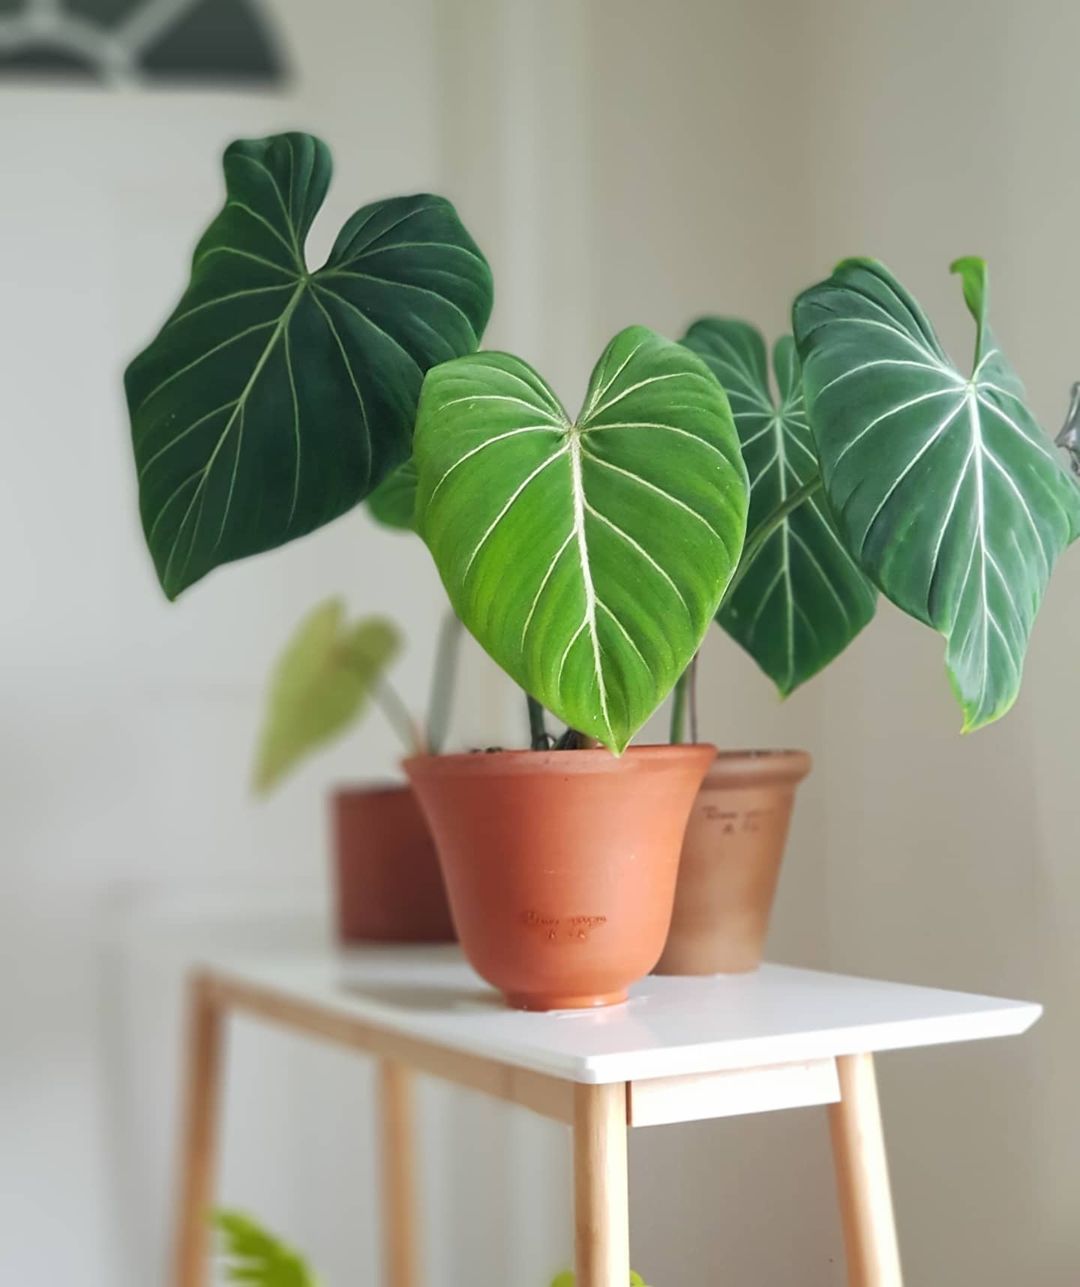 Philodendron growing on a counter. Photo by Instagram user @casa_de_hue.